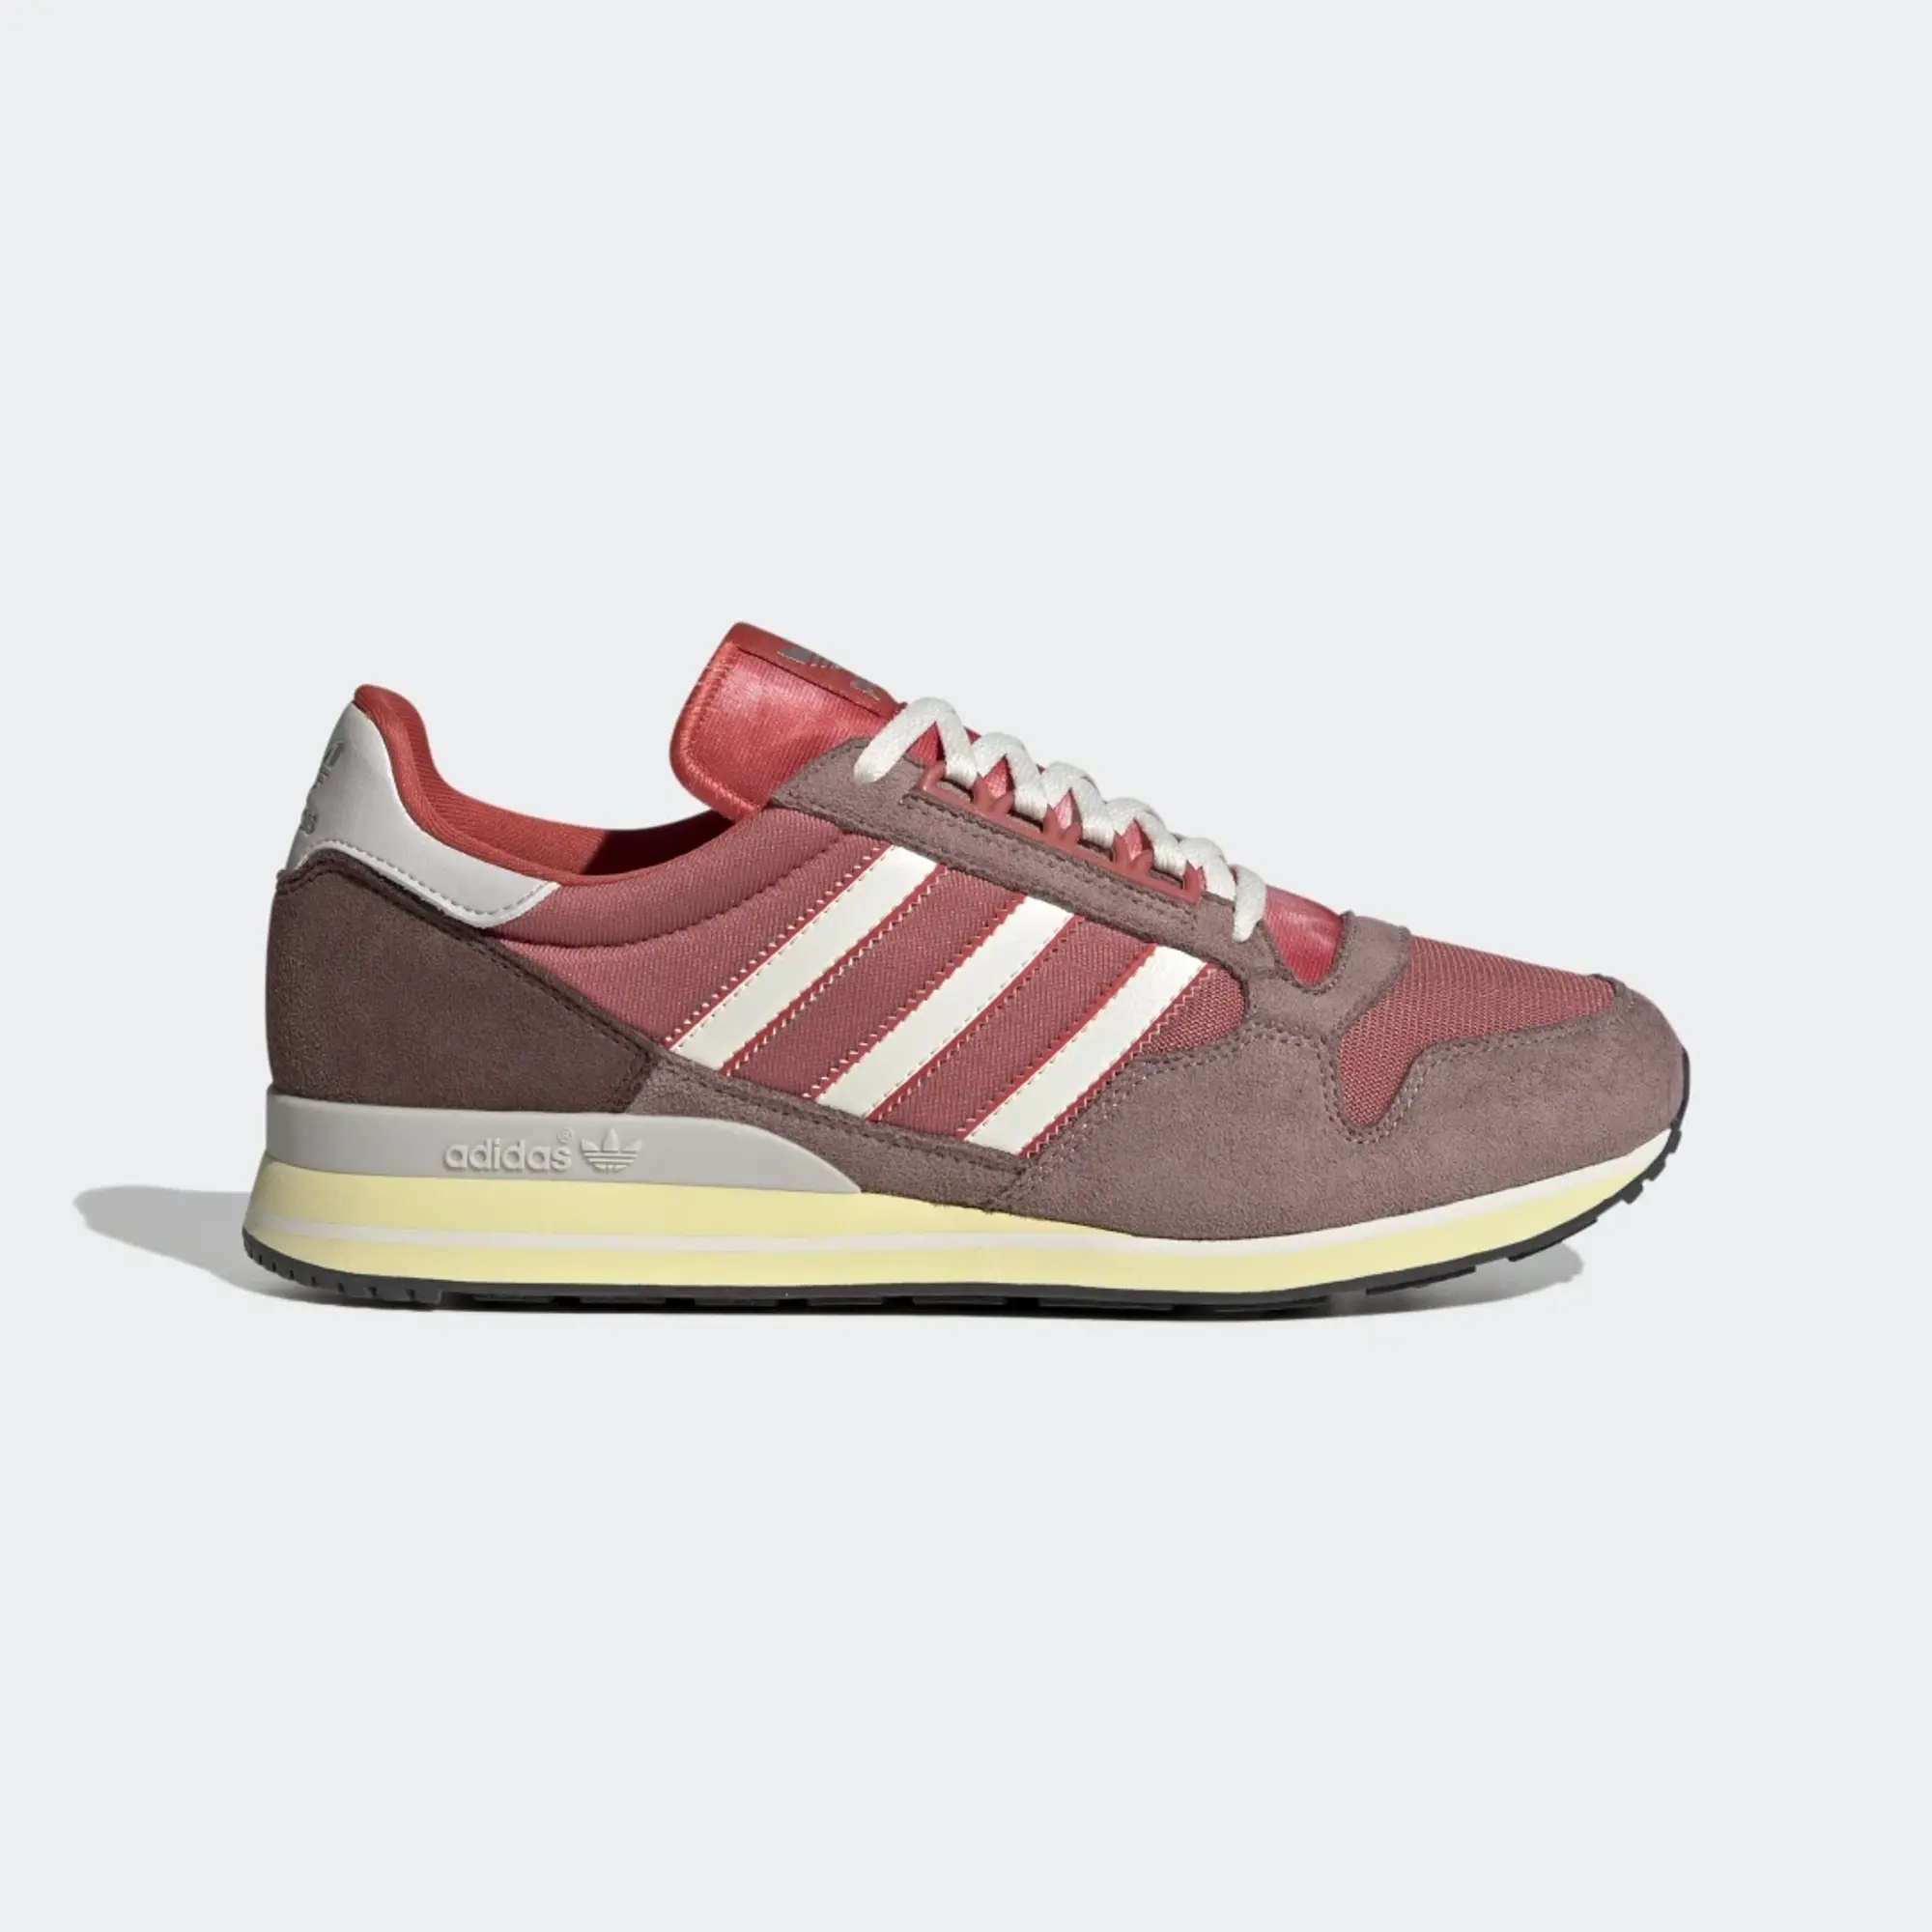 Adidas ZX 500 Red/White/Yellow